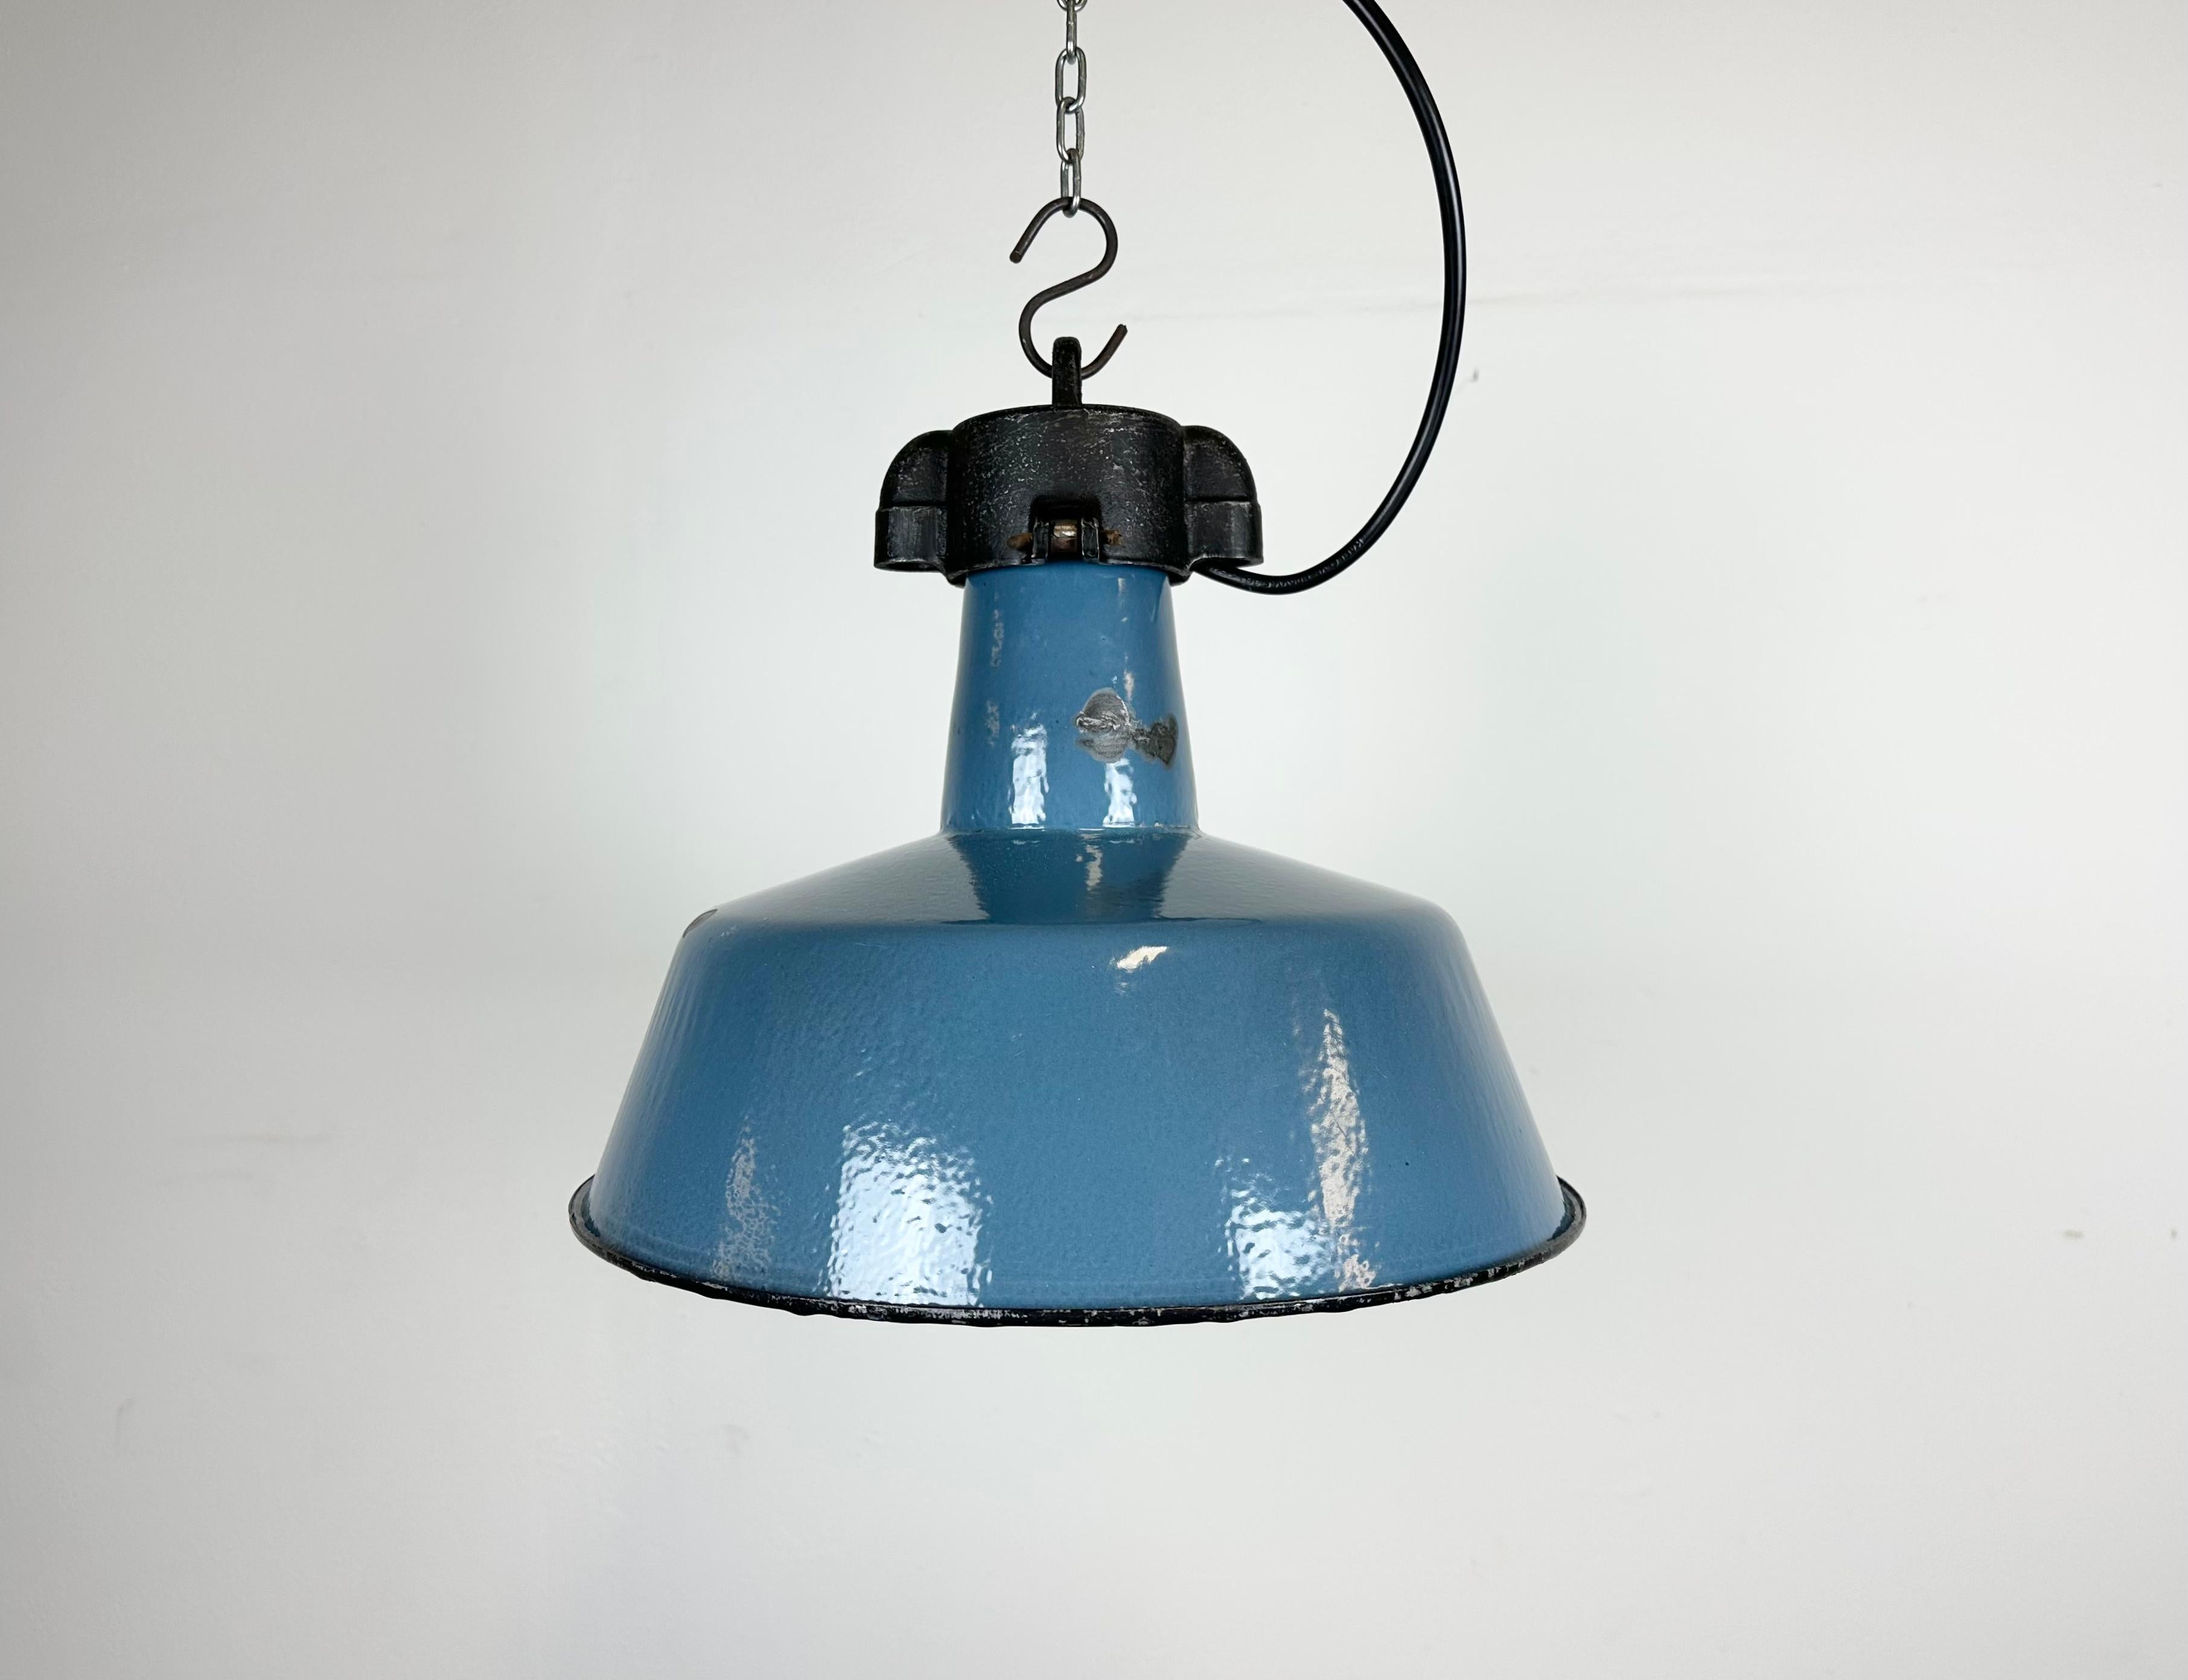 Industrial blue enamel pendant light made by Polam Wilkasy in Poland during the 1960s. White enamel inside the shade. Cast iron top. The porcelain socket requires E 27/ E 26 light bulbs. New wire. The weight of the lamp is 2 kg.